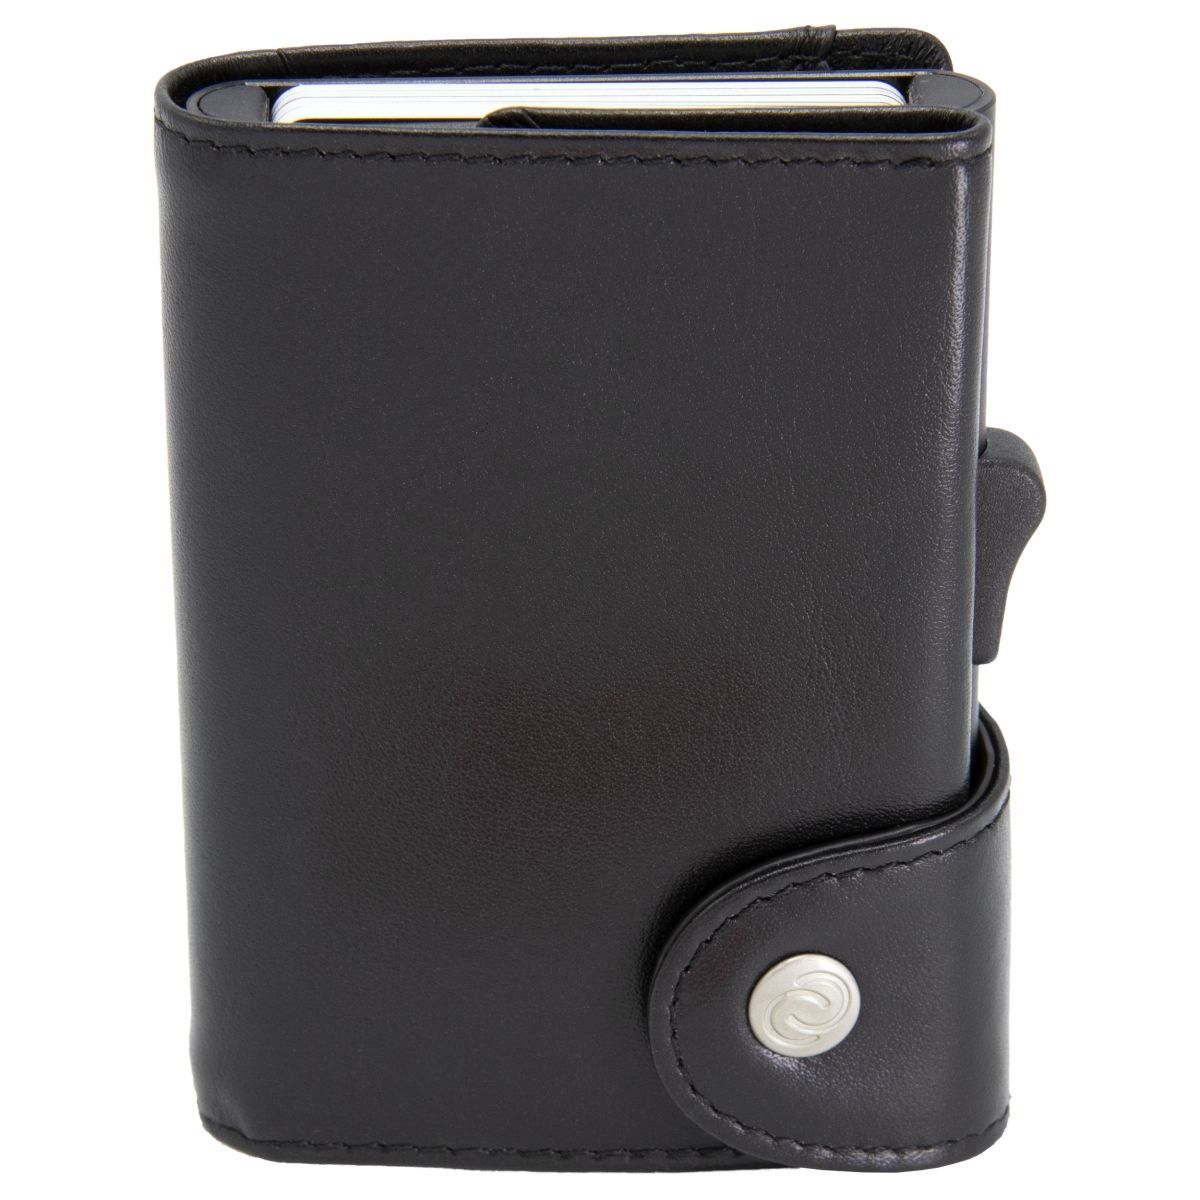 C-Secure XL Aluminum Card Holder with PU Leather - Black